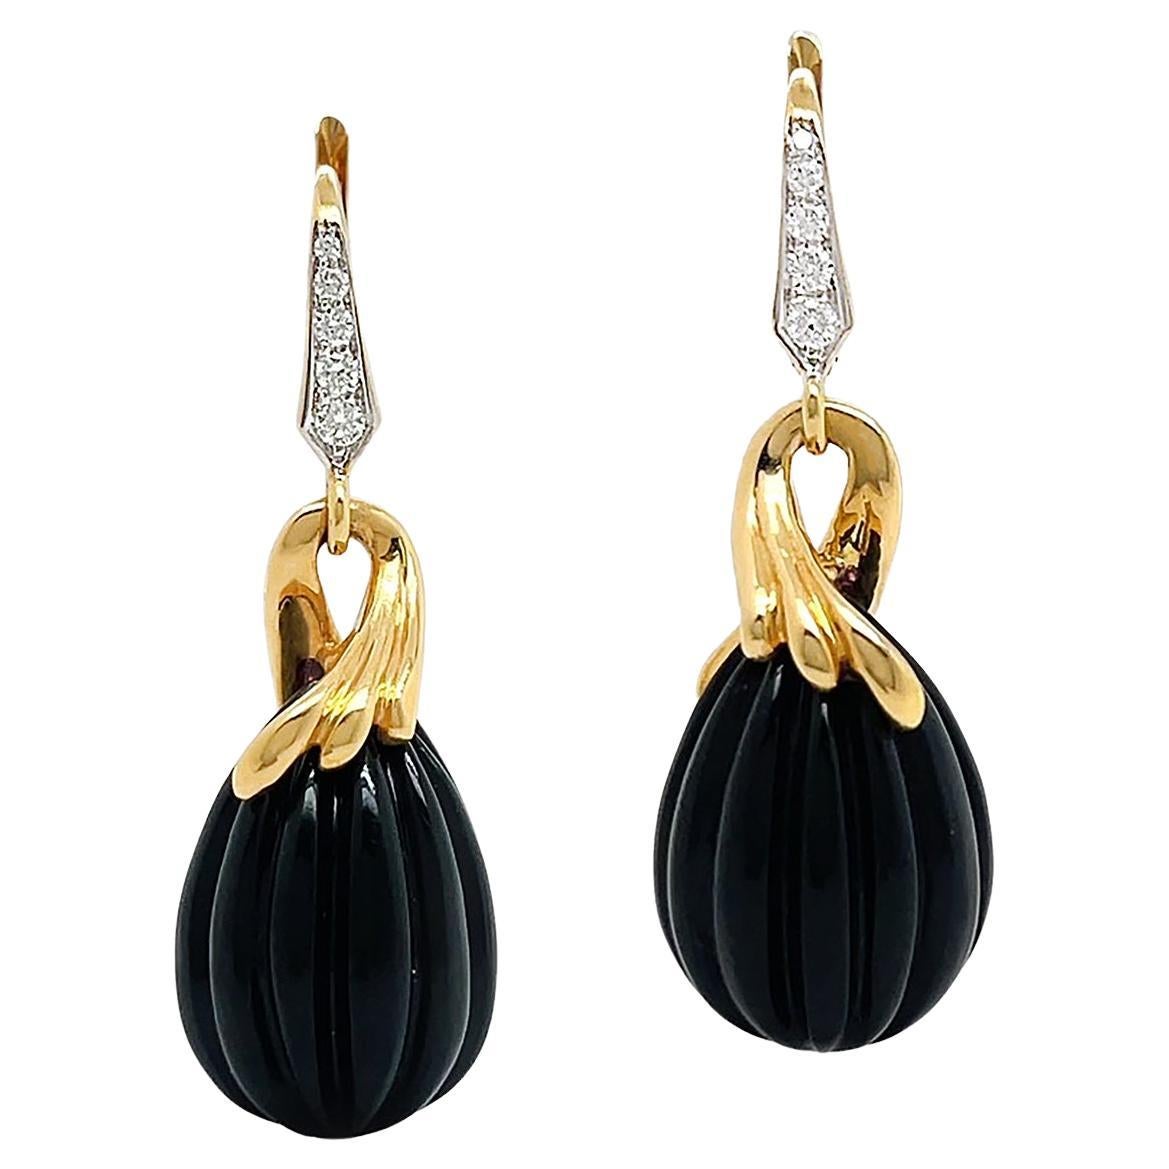 18K Yellow Gold Onyx Carved Drop Earrings with Diamond Accents